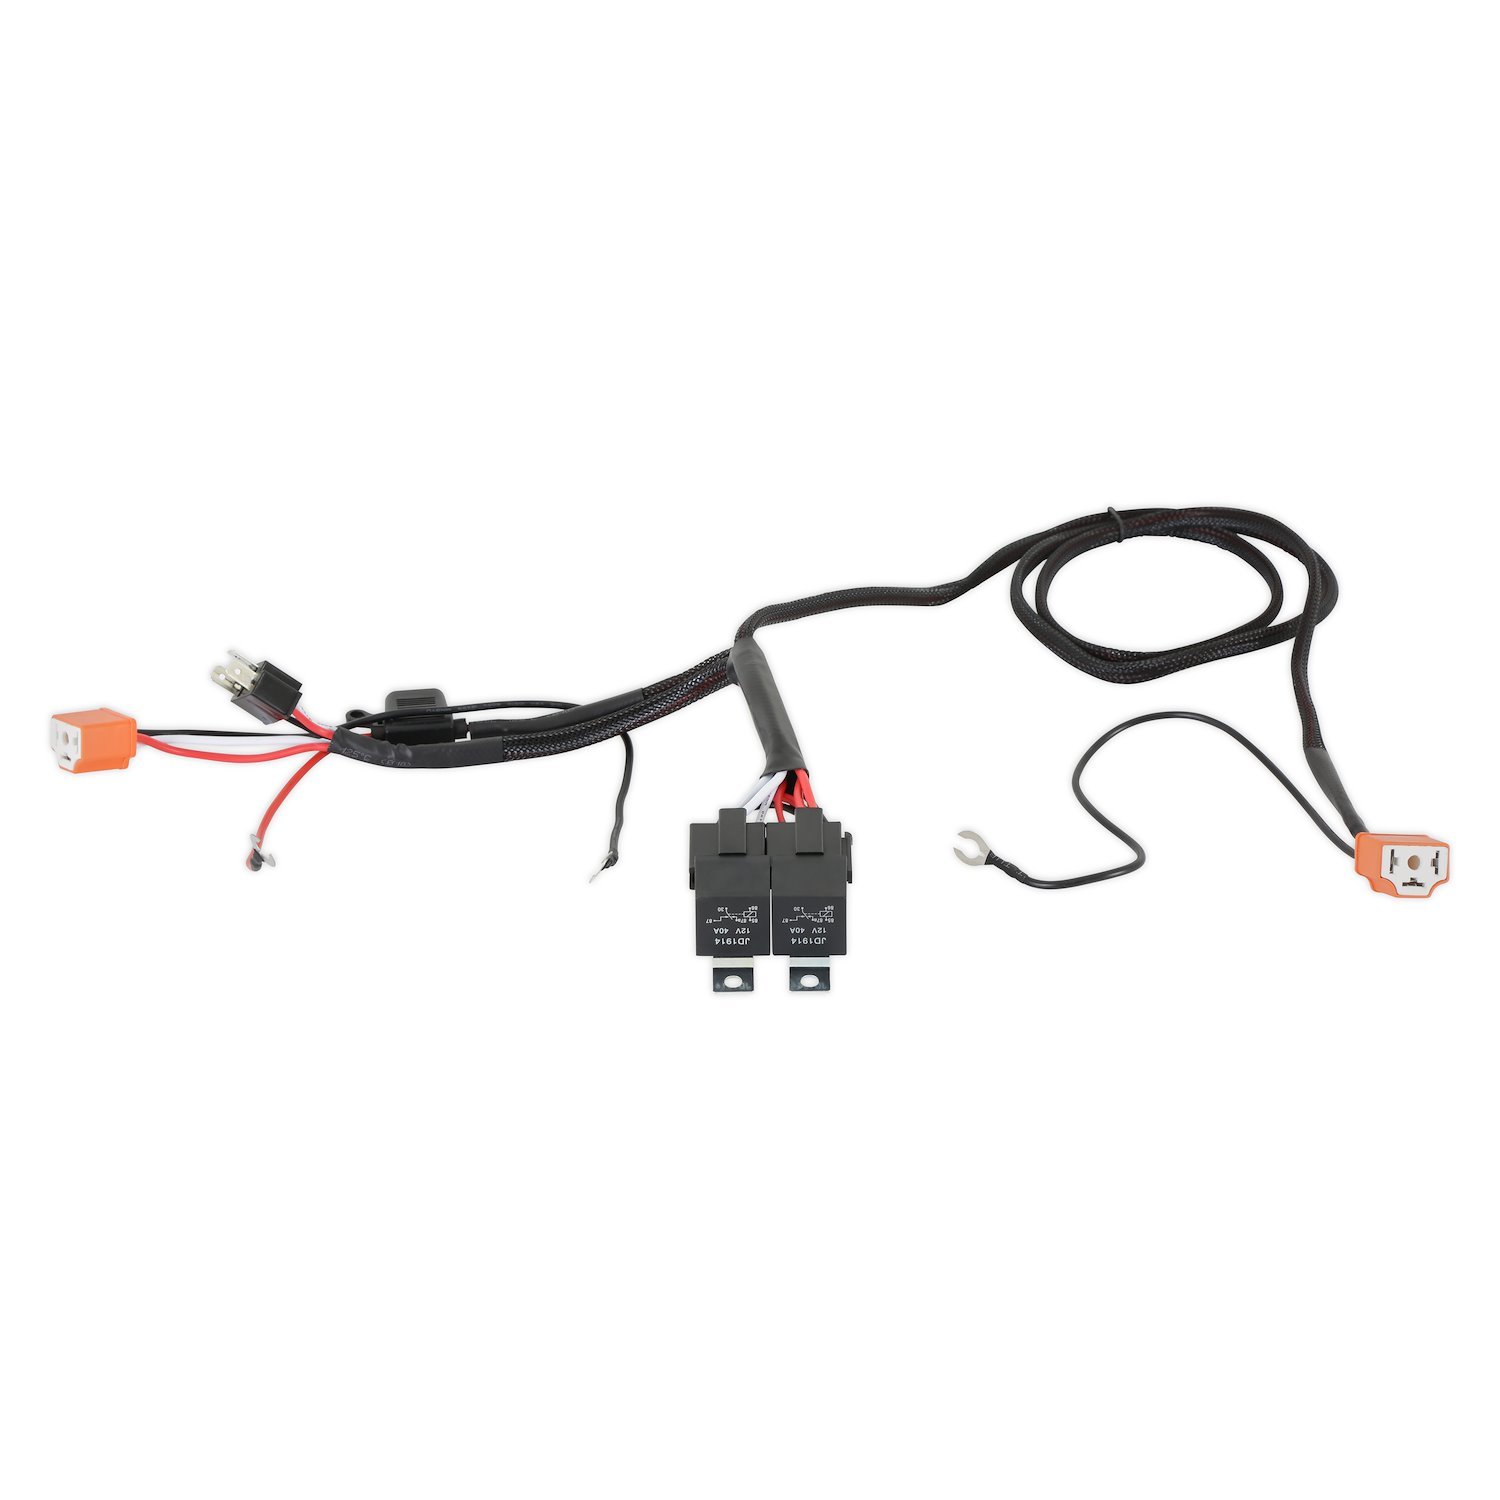 RetroBright Switched-Ground Headlight Harness for 1965-1985 Toyota Land Cruiser